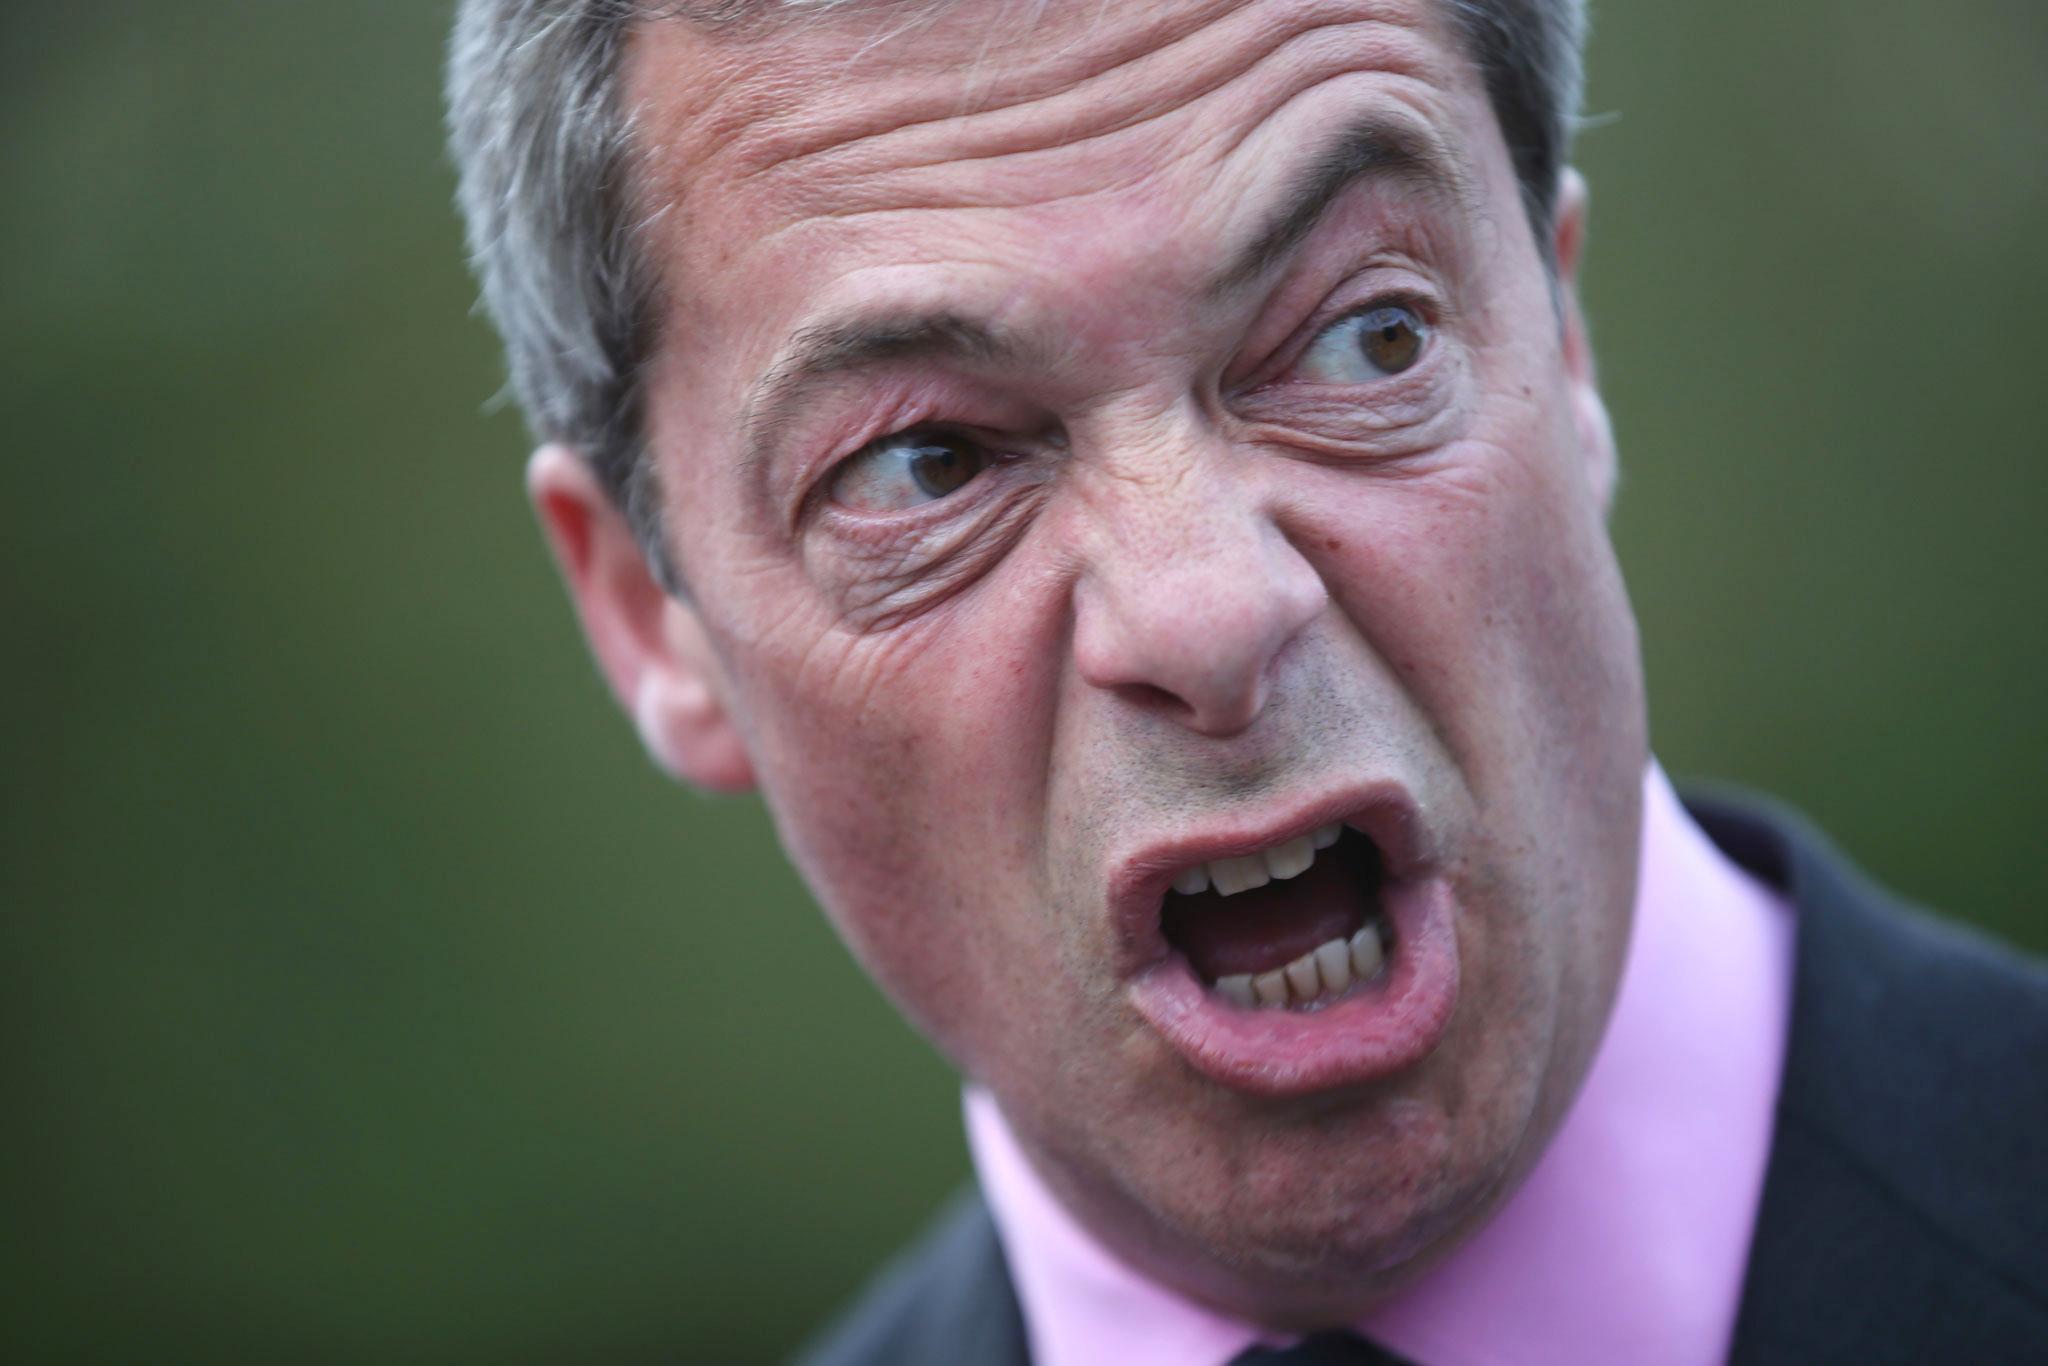 Ukip will probably be the night's winner on 22 May